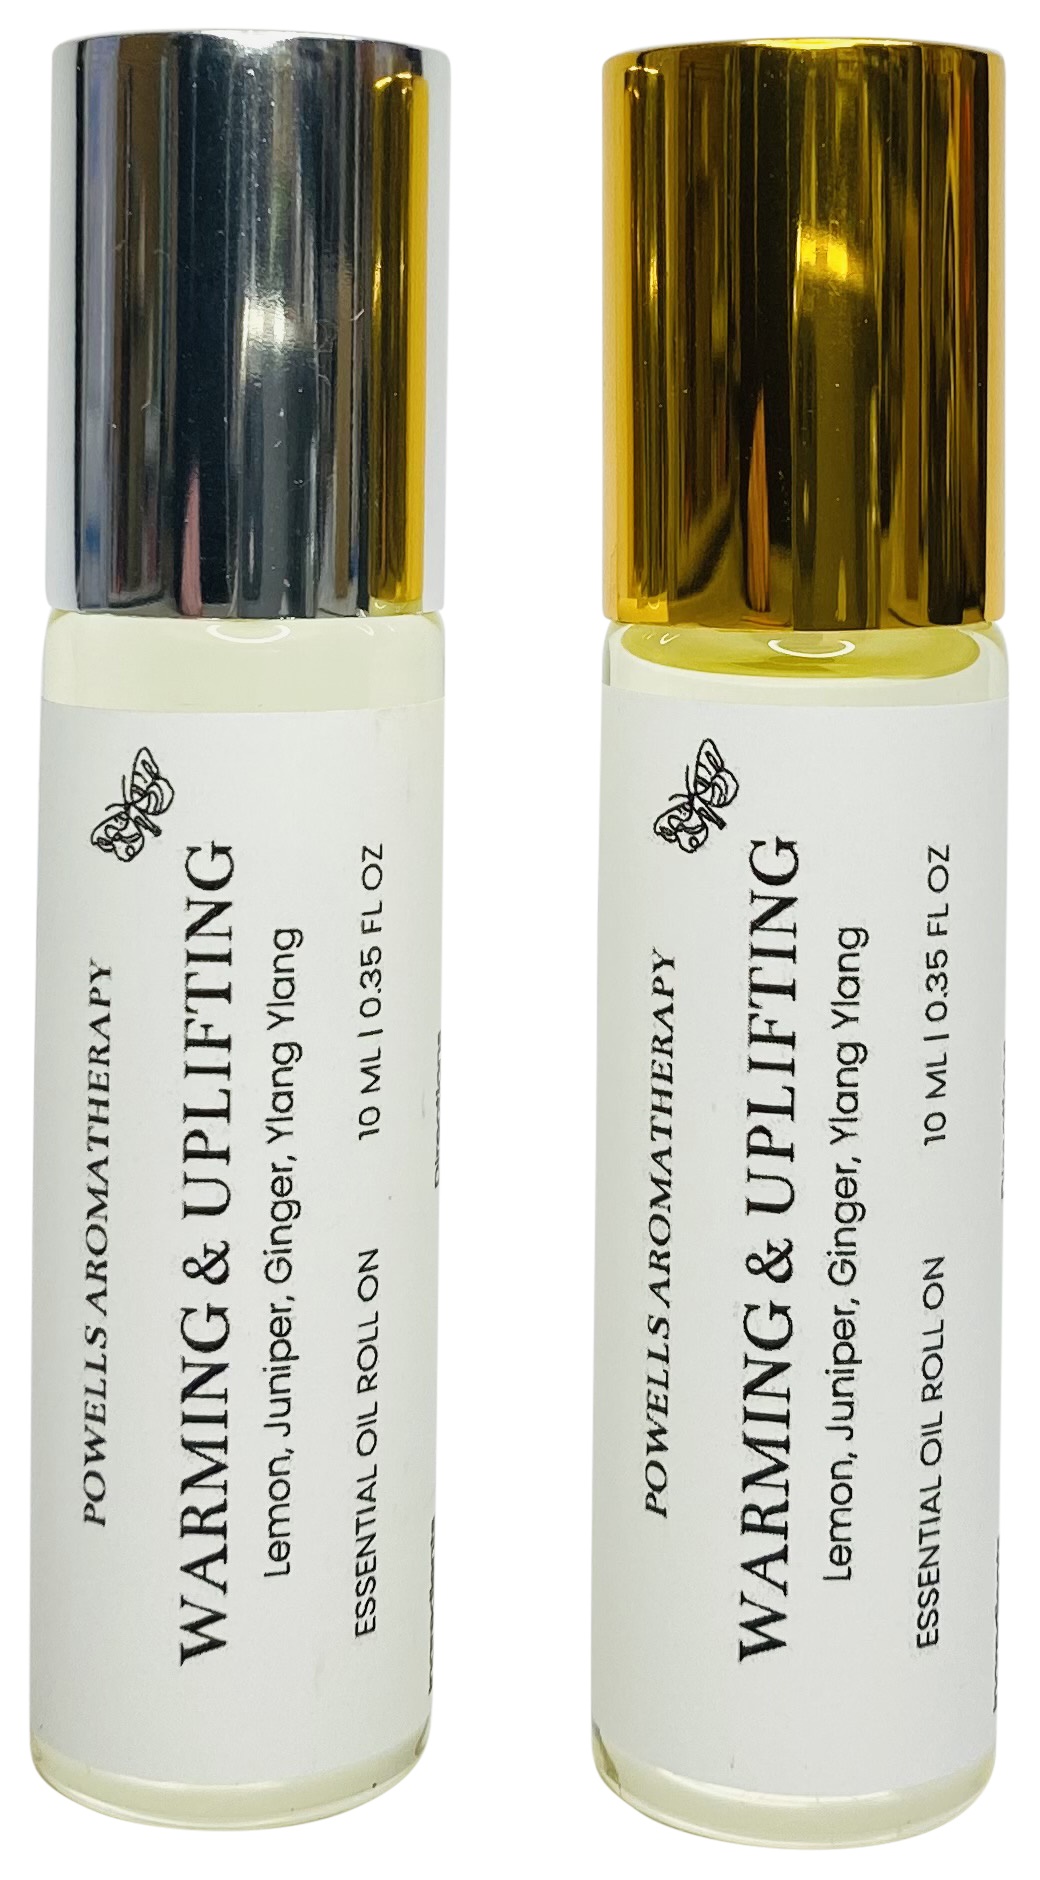 Essential Oil Roll On Blend - Warming and Uplifting